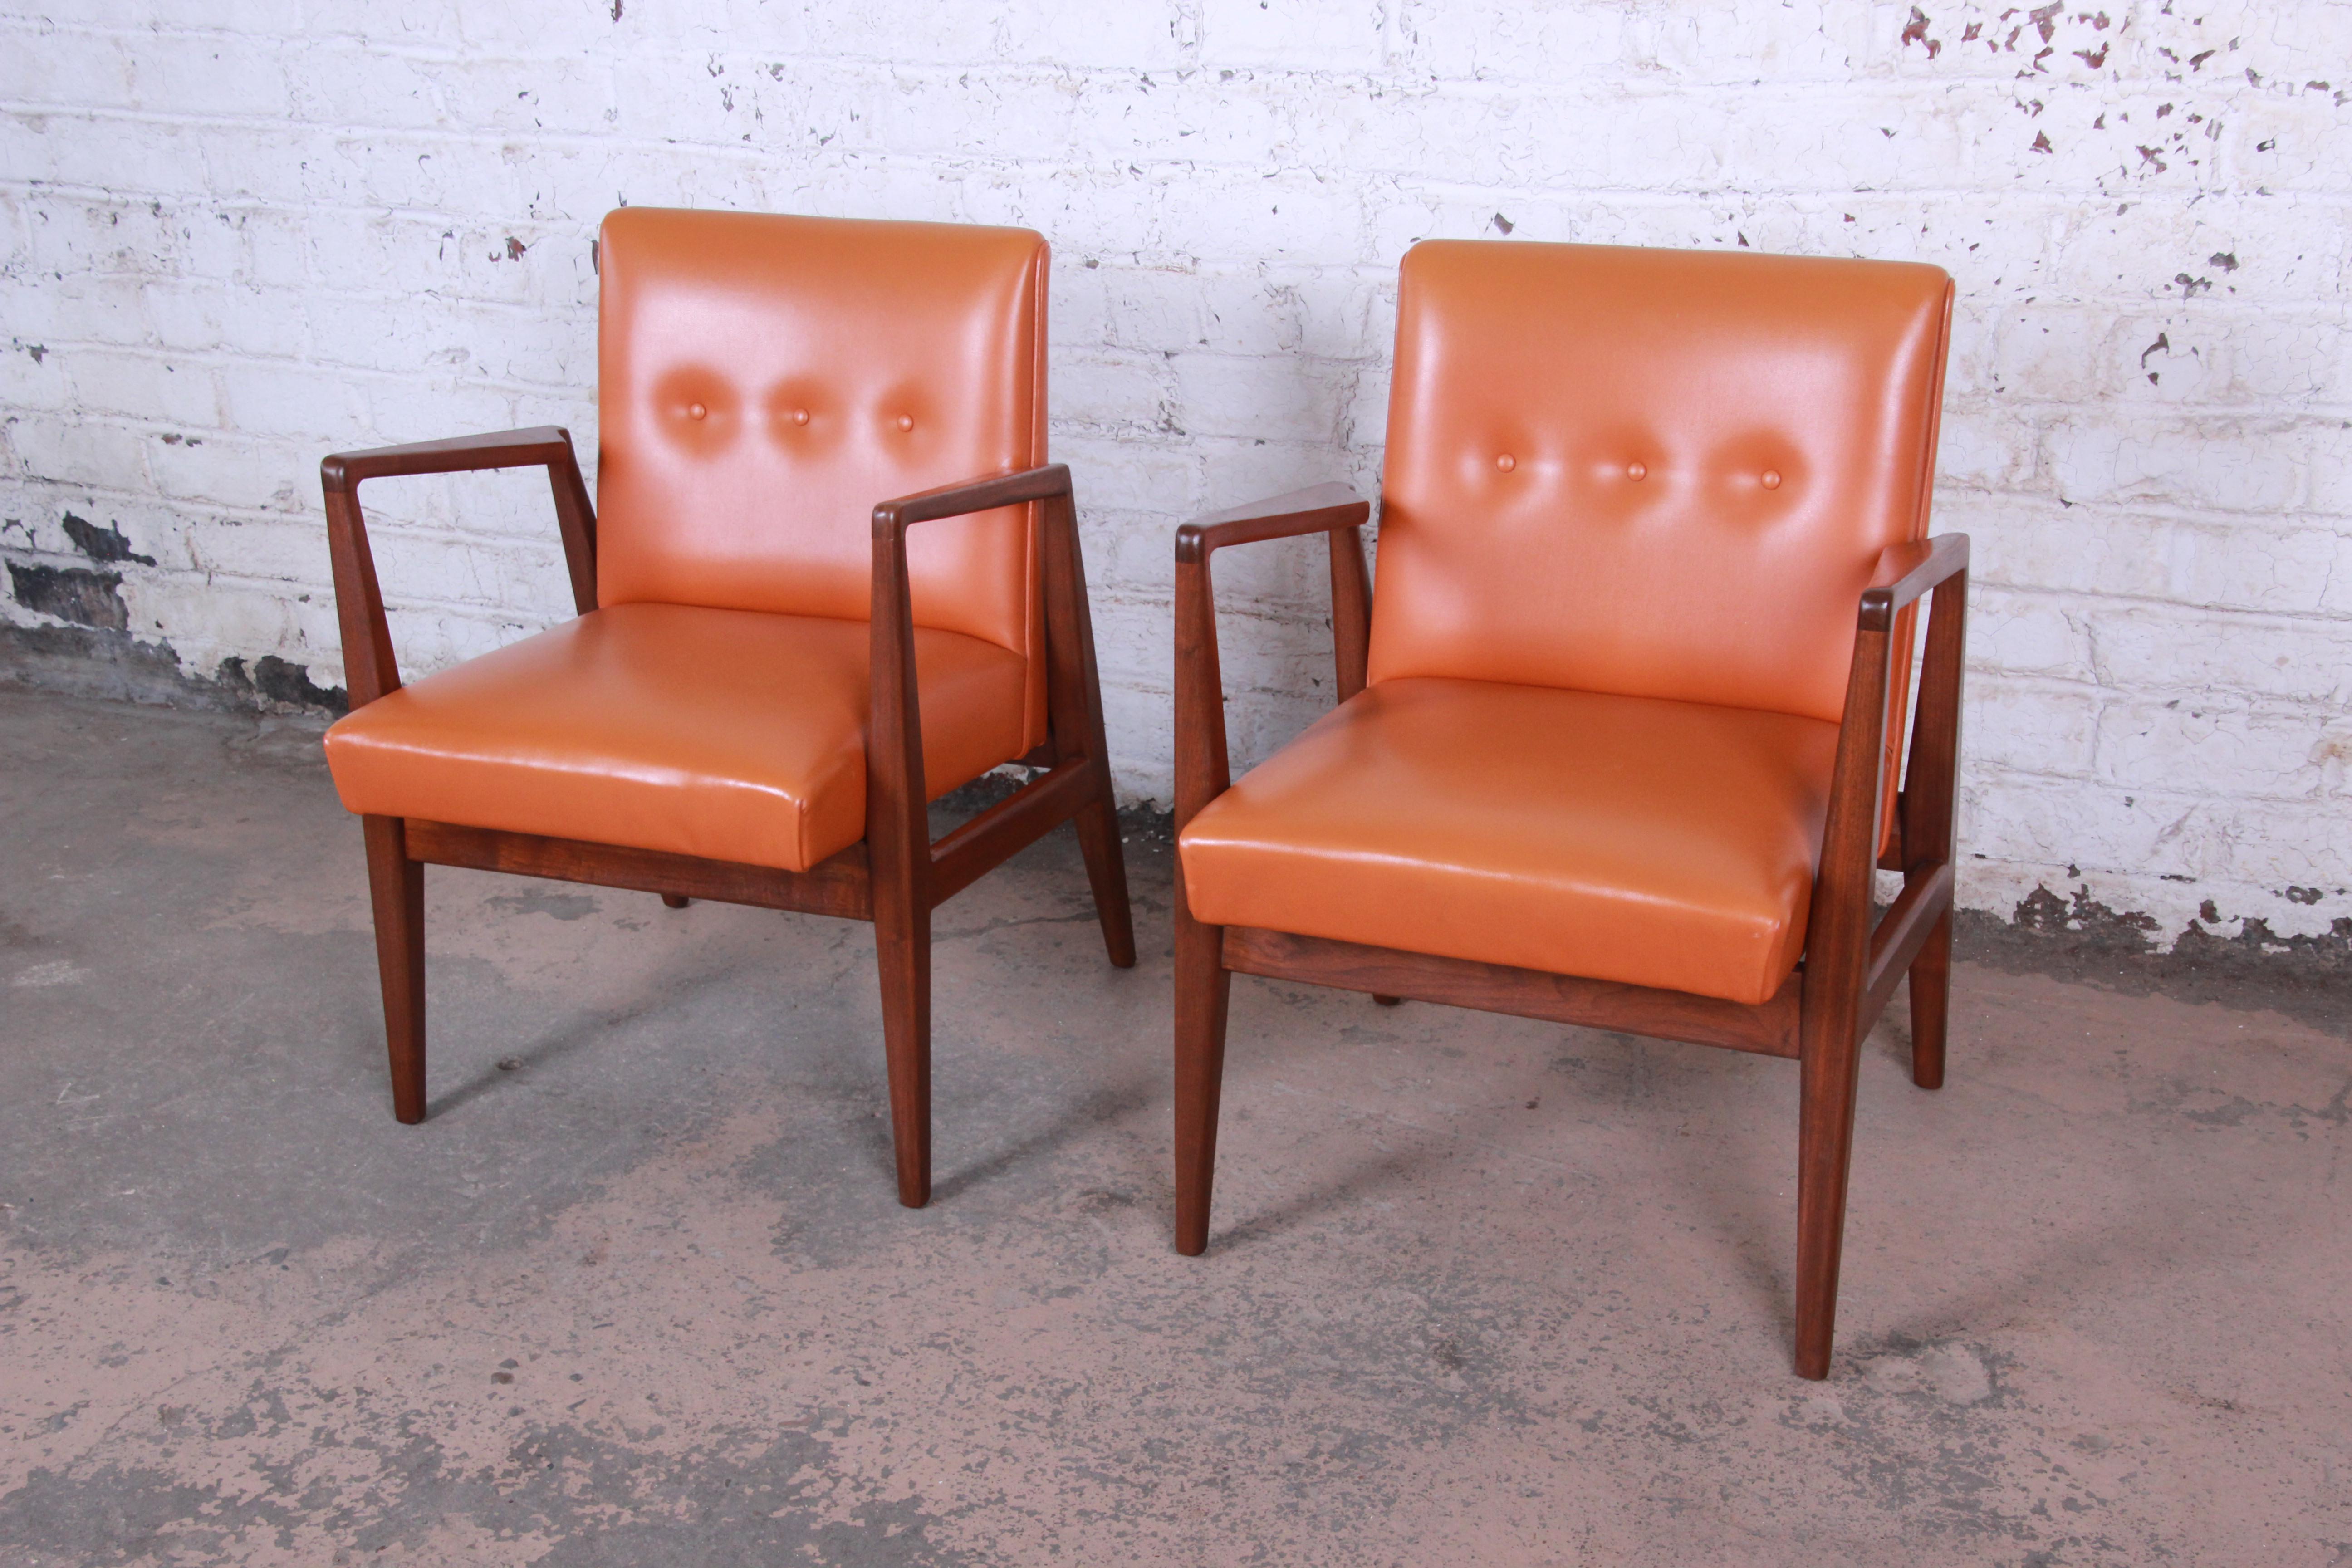 Upholstery Jens Risom Mid-Century Modern Sculpted Walnut Lounge Chairs, Pair